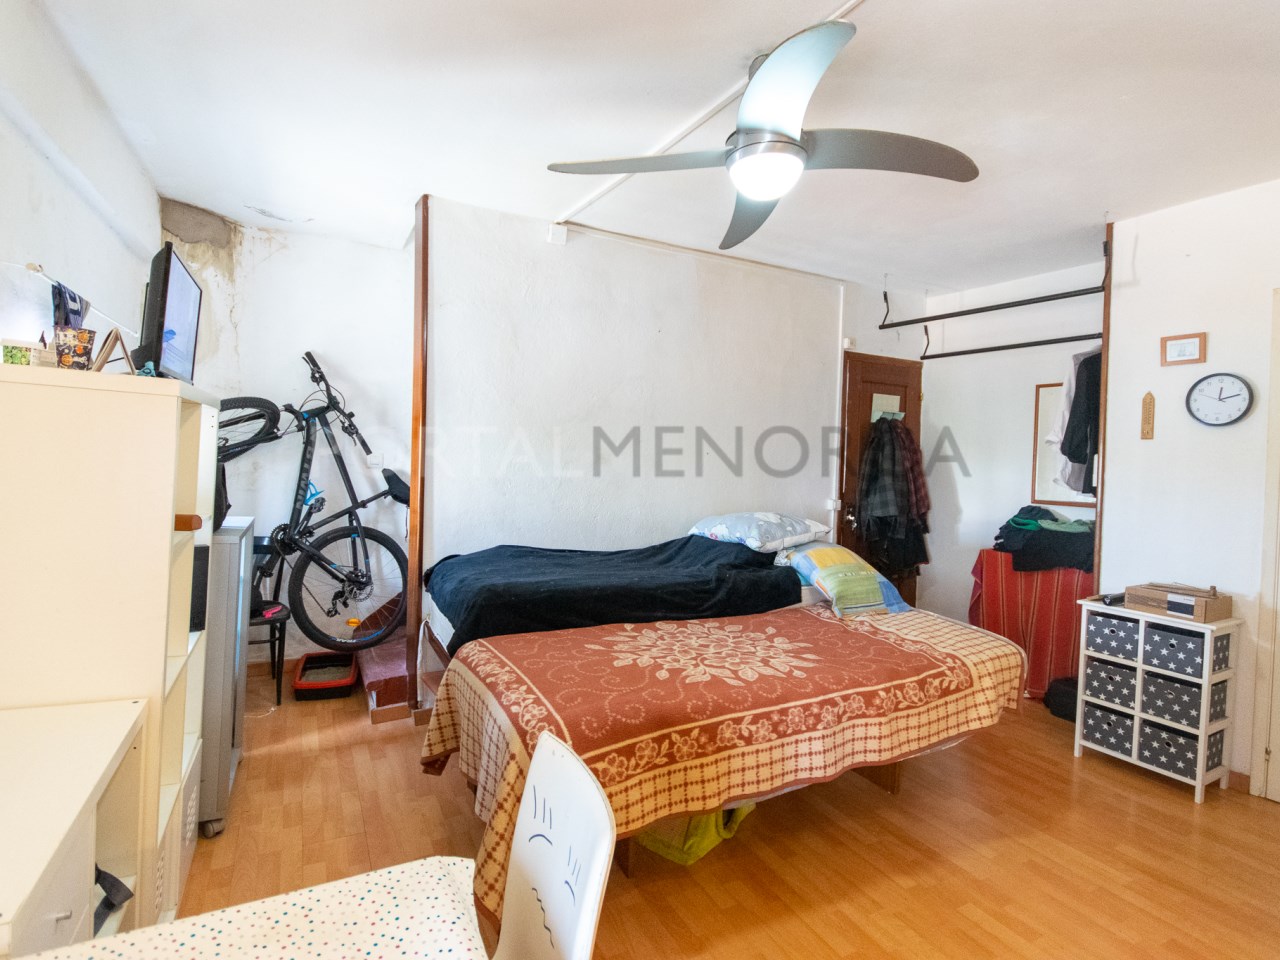 3rd floor building with 3 apartments in the center of Mahon